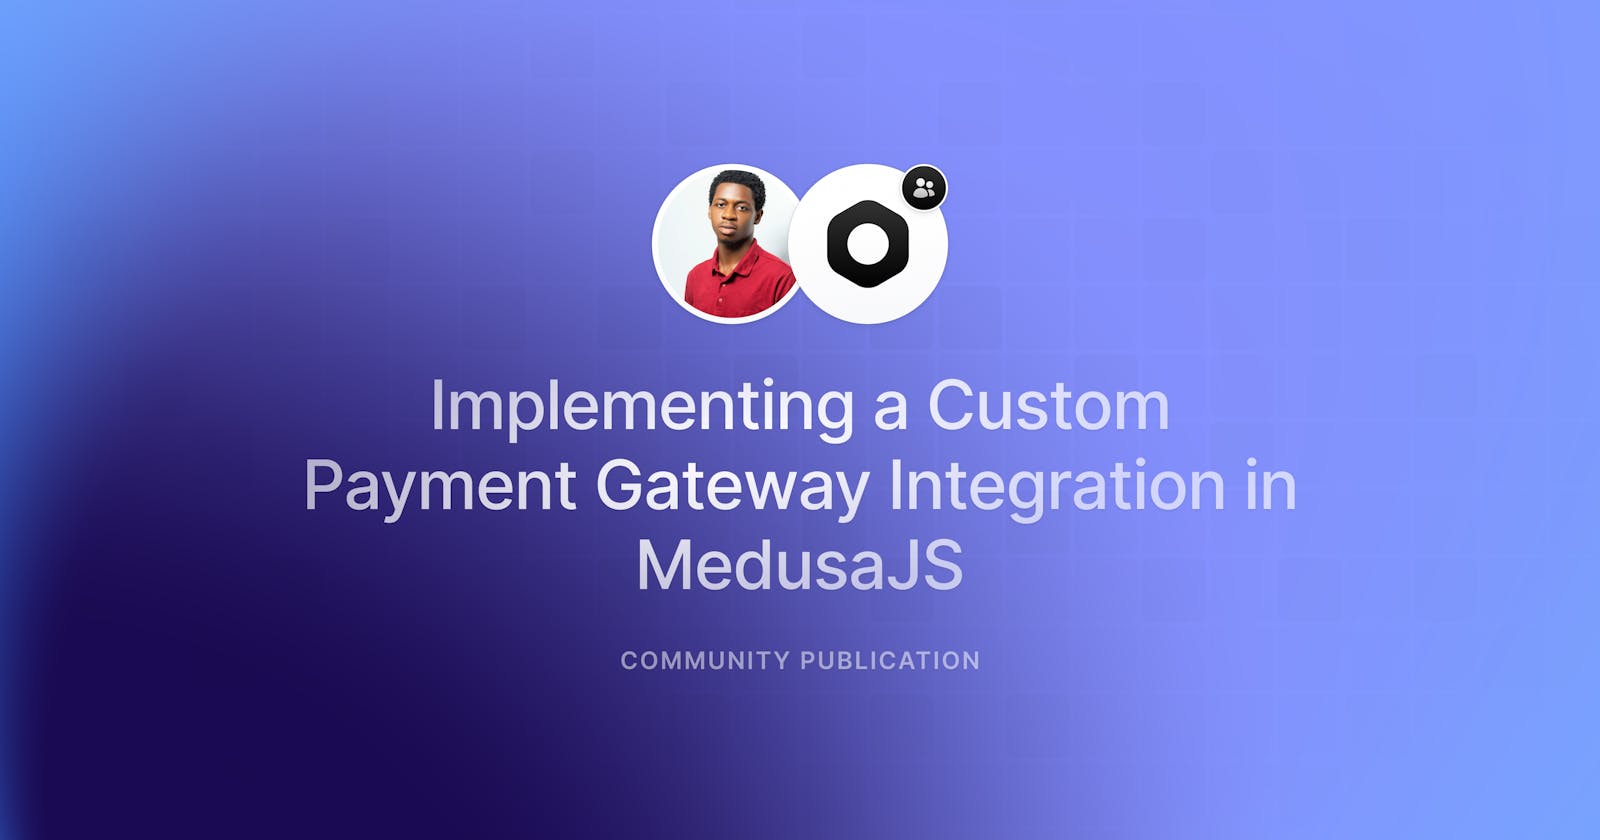 Implementing a Custom Payment Gateway Integration in MedusaJS